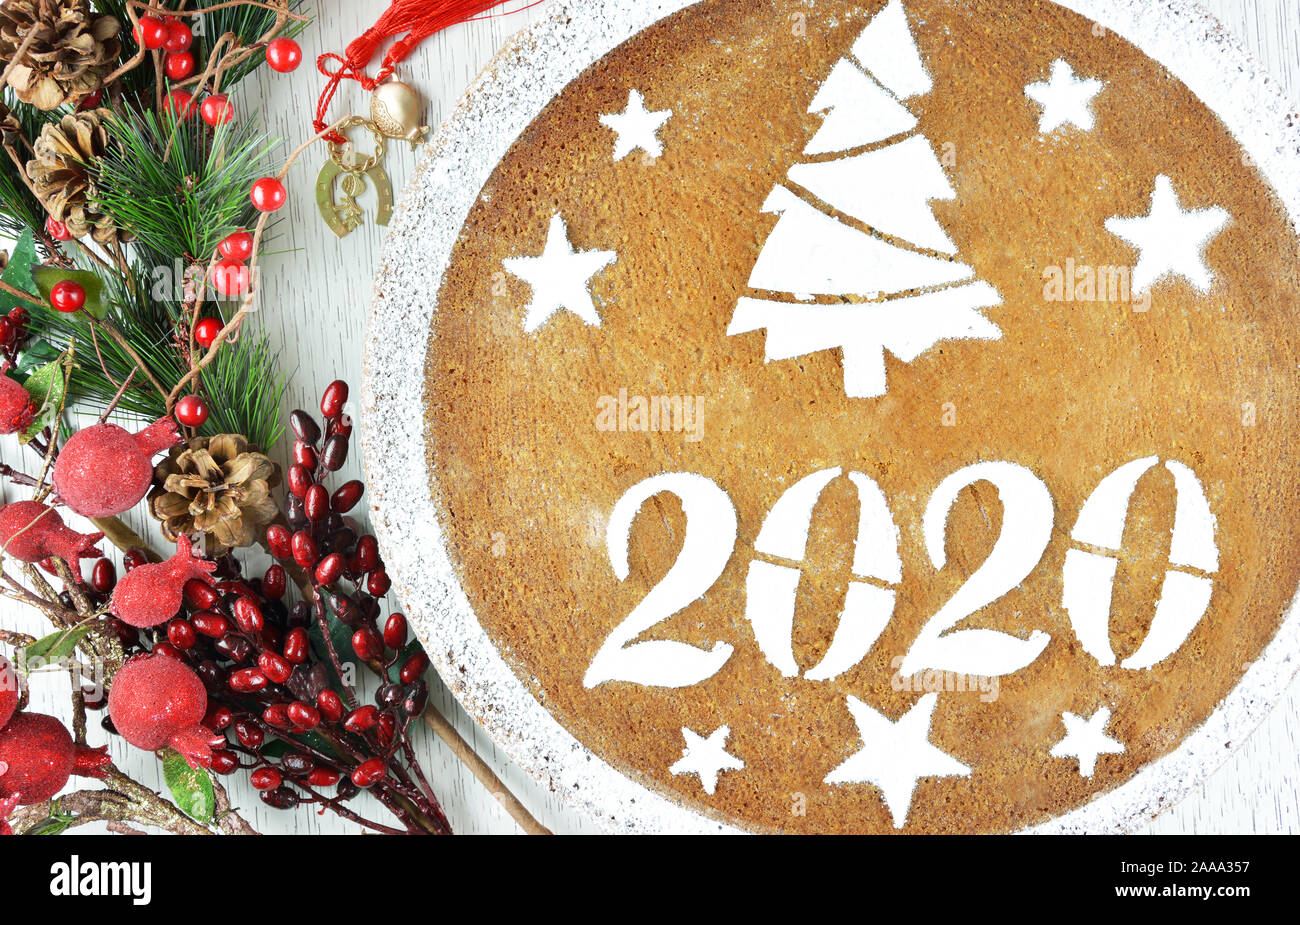 greek christmas 2020 Traditional Greek New Year S Cake Known As Vasilopita For 2020 Lucky Charms With Red Tassels And Artificial Pine And Red Berries Sticks Stock Photo Alamy greek christmas 2020